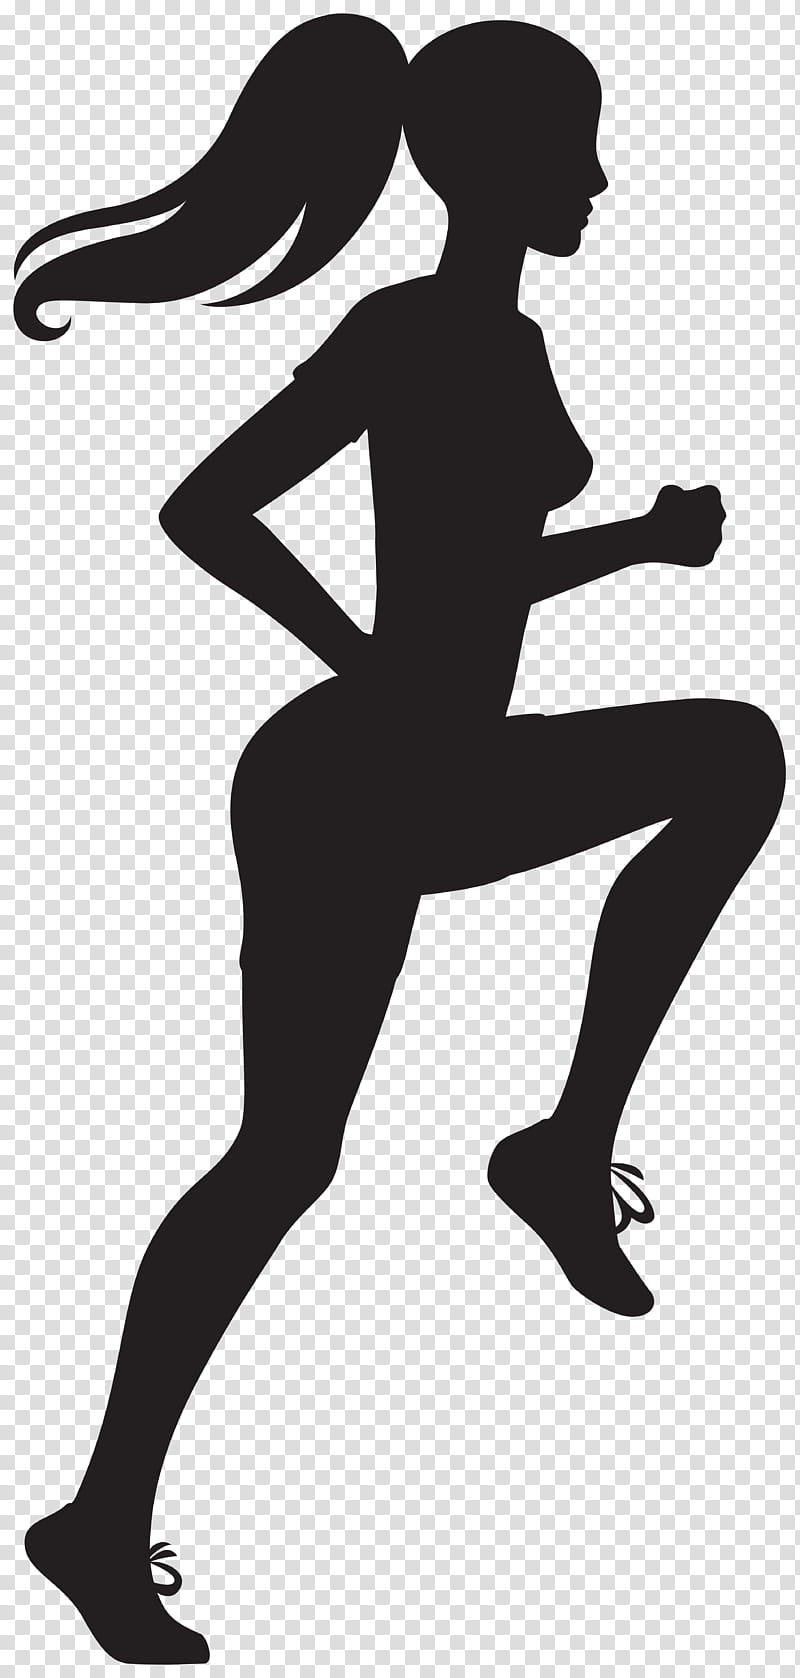 Girl, Silhouette, Woman, Wall Decal, Running, Sports, Sticker, Leg transparent background PNG clipart